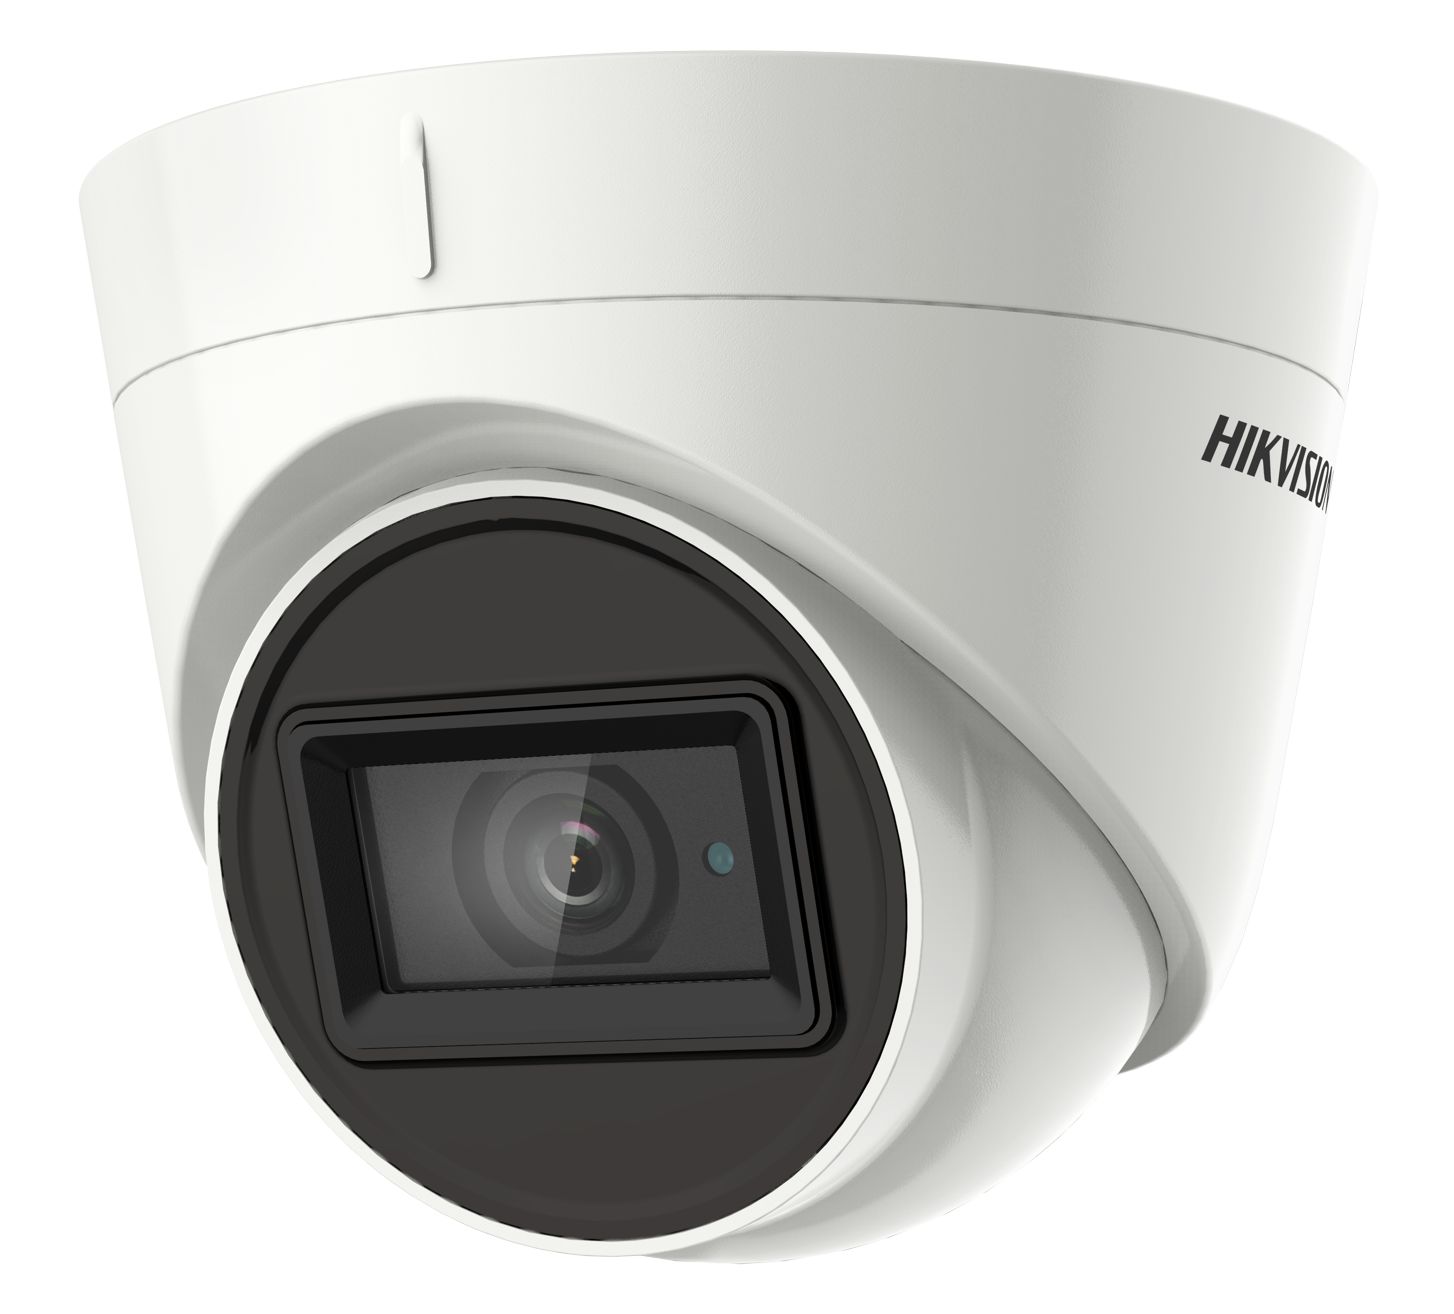 Hikvision DS-2CE78H0T-IT3F -2.8MM - 5MP Fixed Lens EXIR Turret Camera with Audio